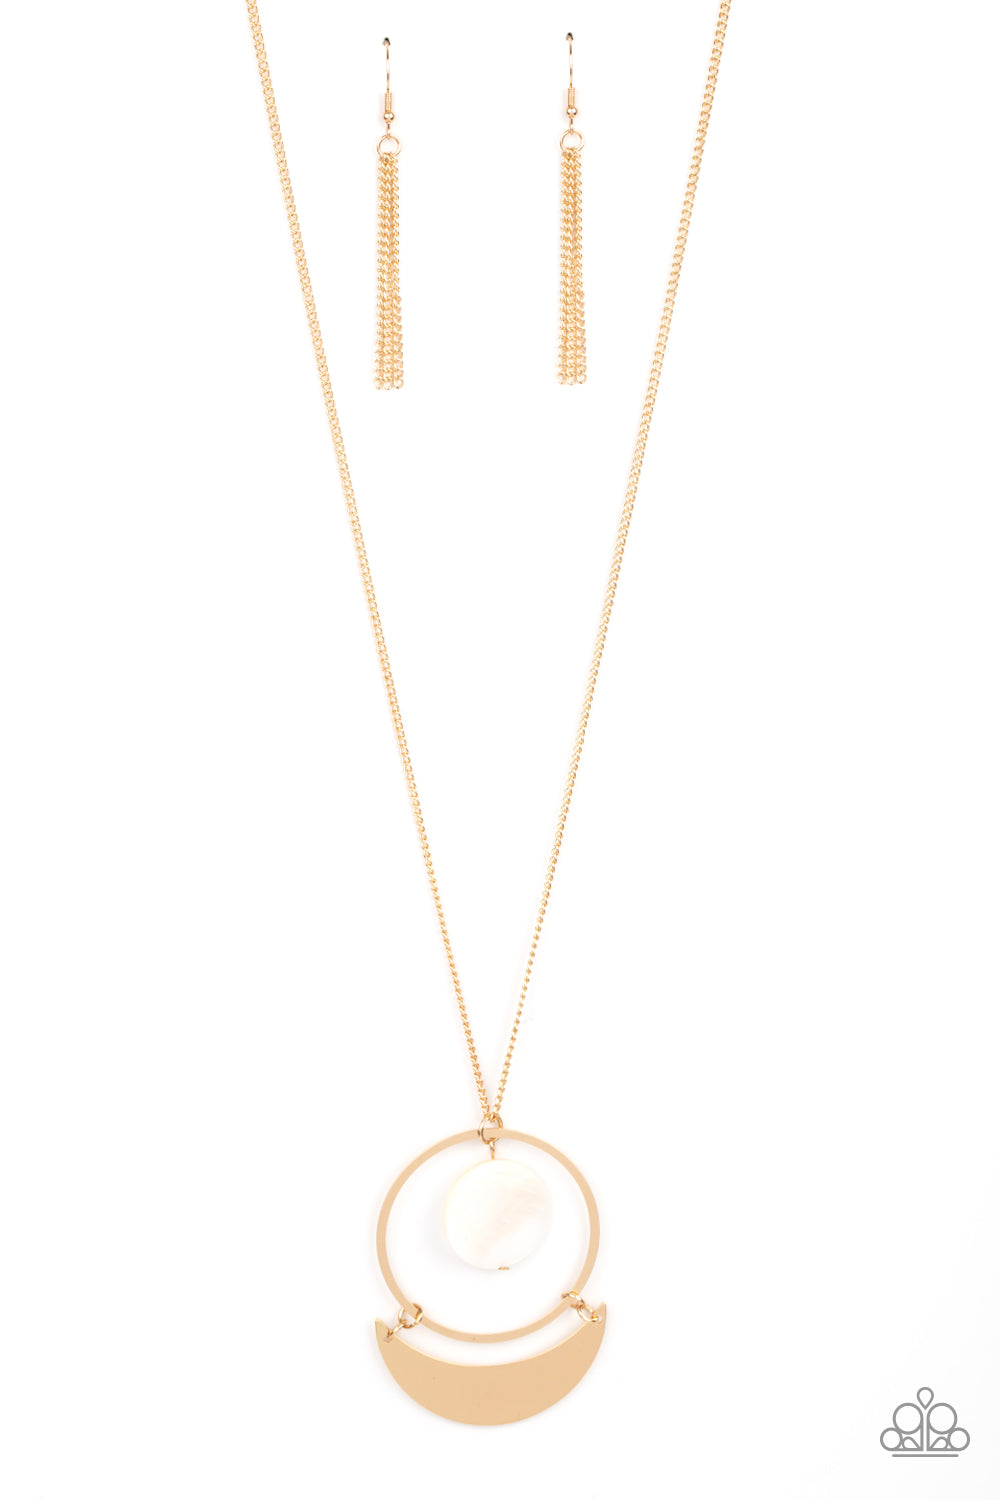 NOONLIGHT SAILING - GOLD NECKLACE